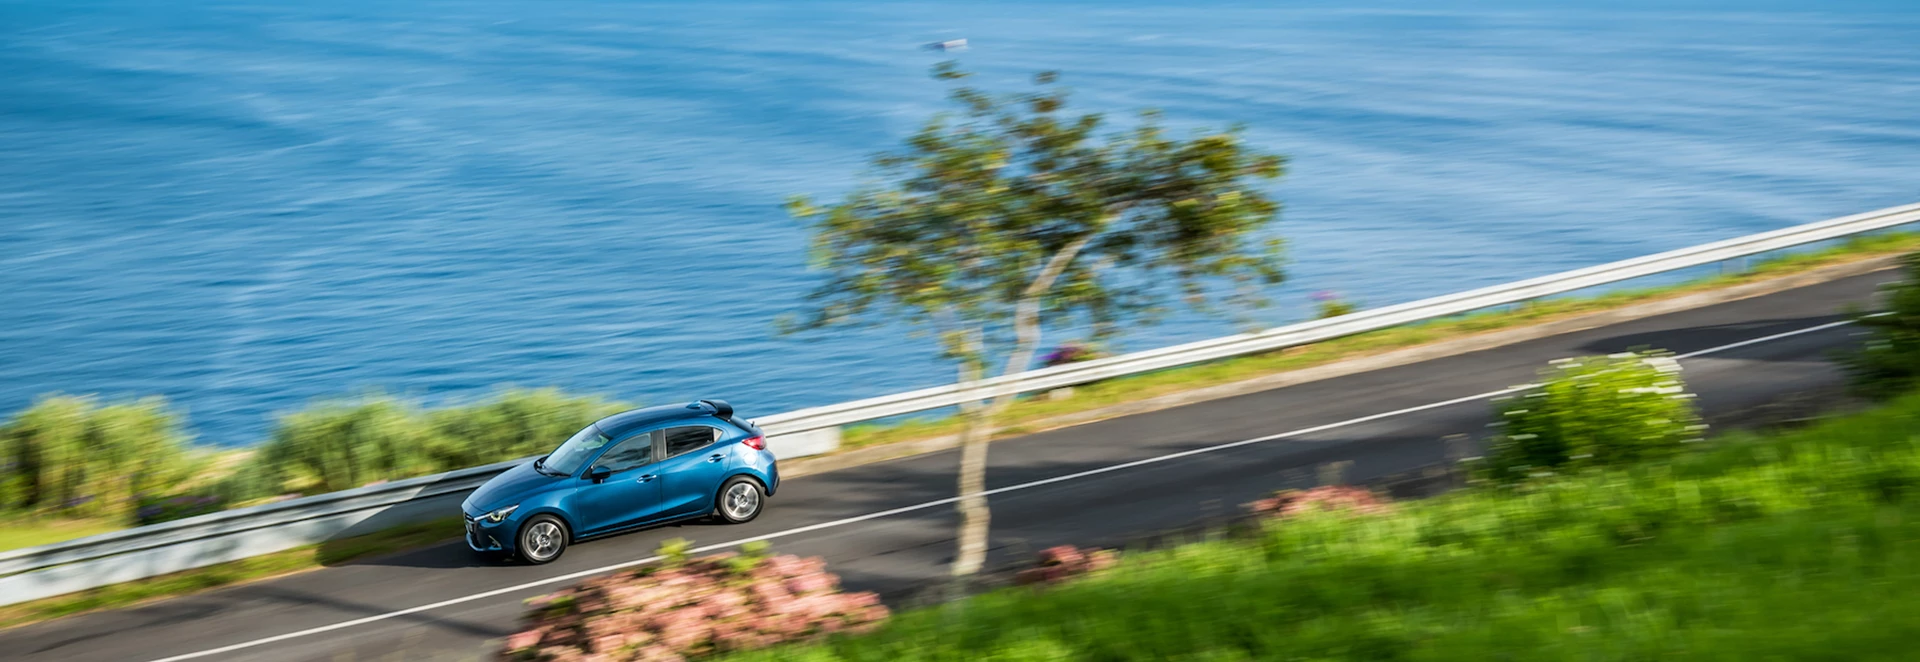 Europe’s Hawaii: Sao Miguel from the seat of a Mazda 2 